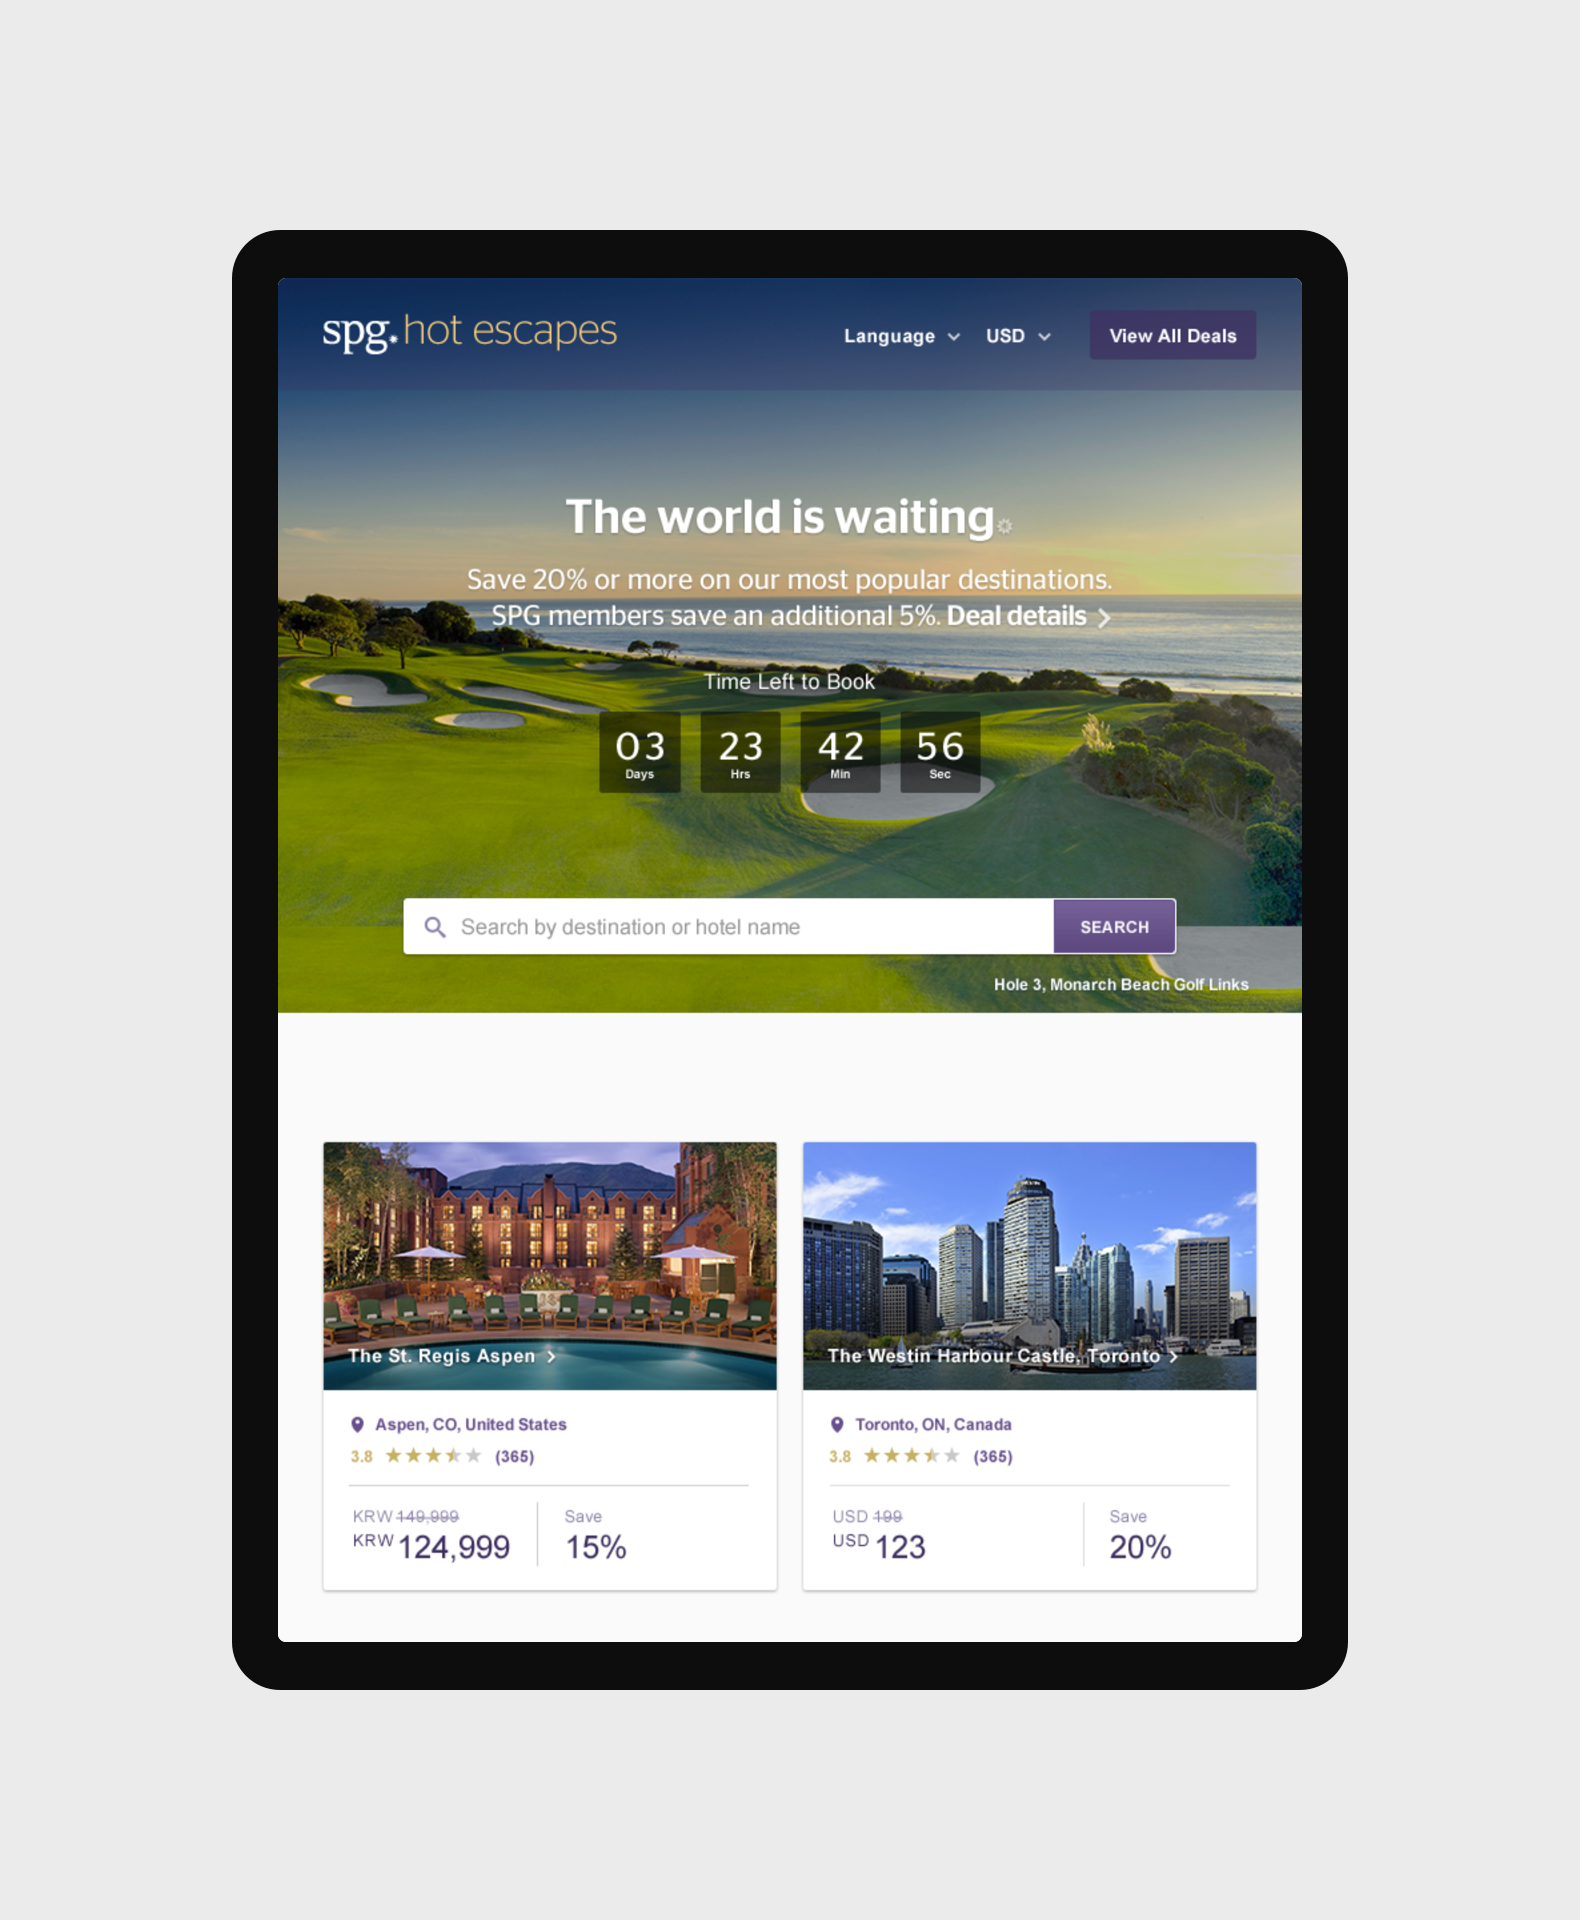 SPG Hot Escapes search results page - tablet